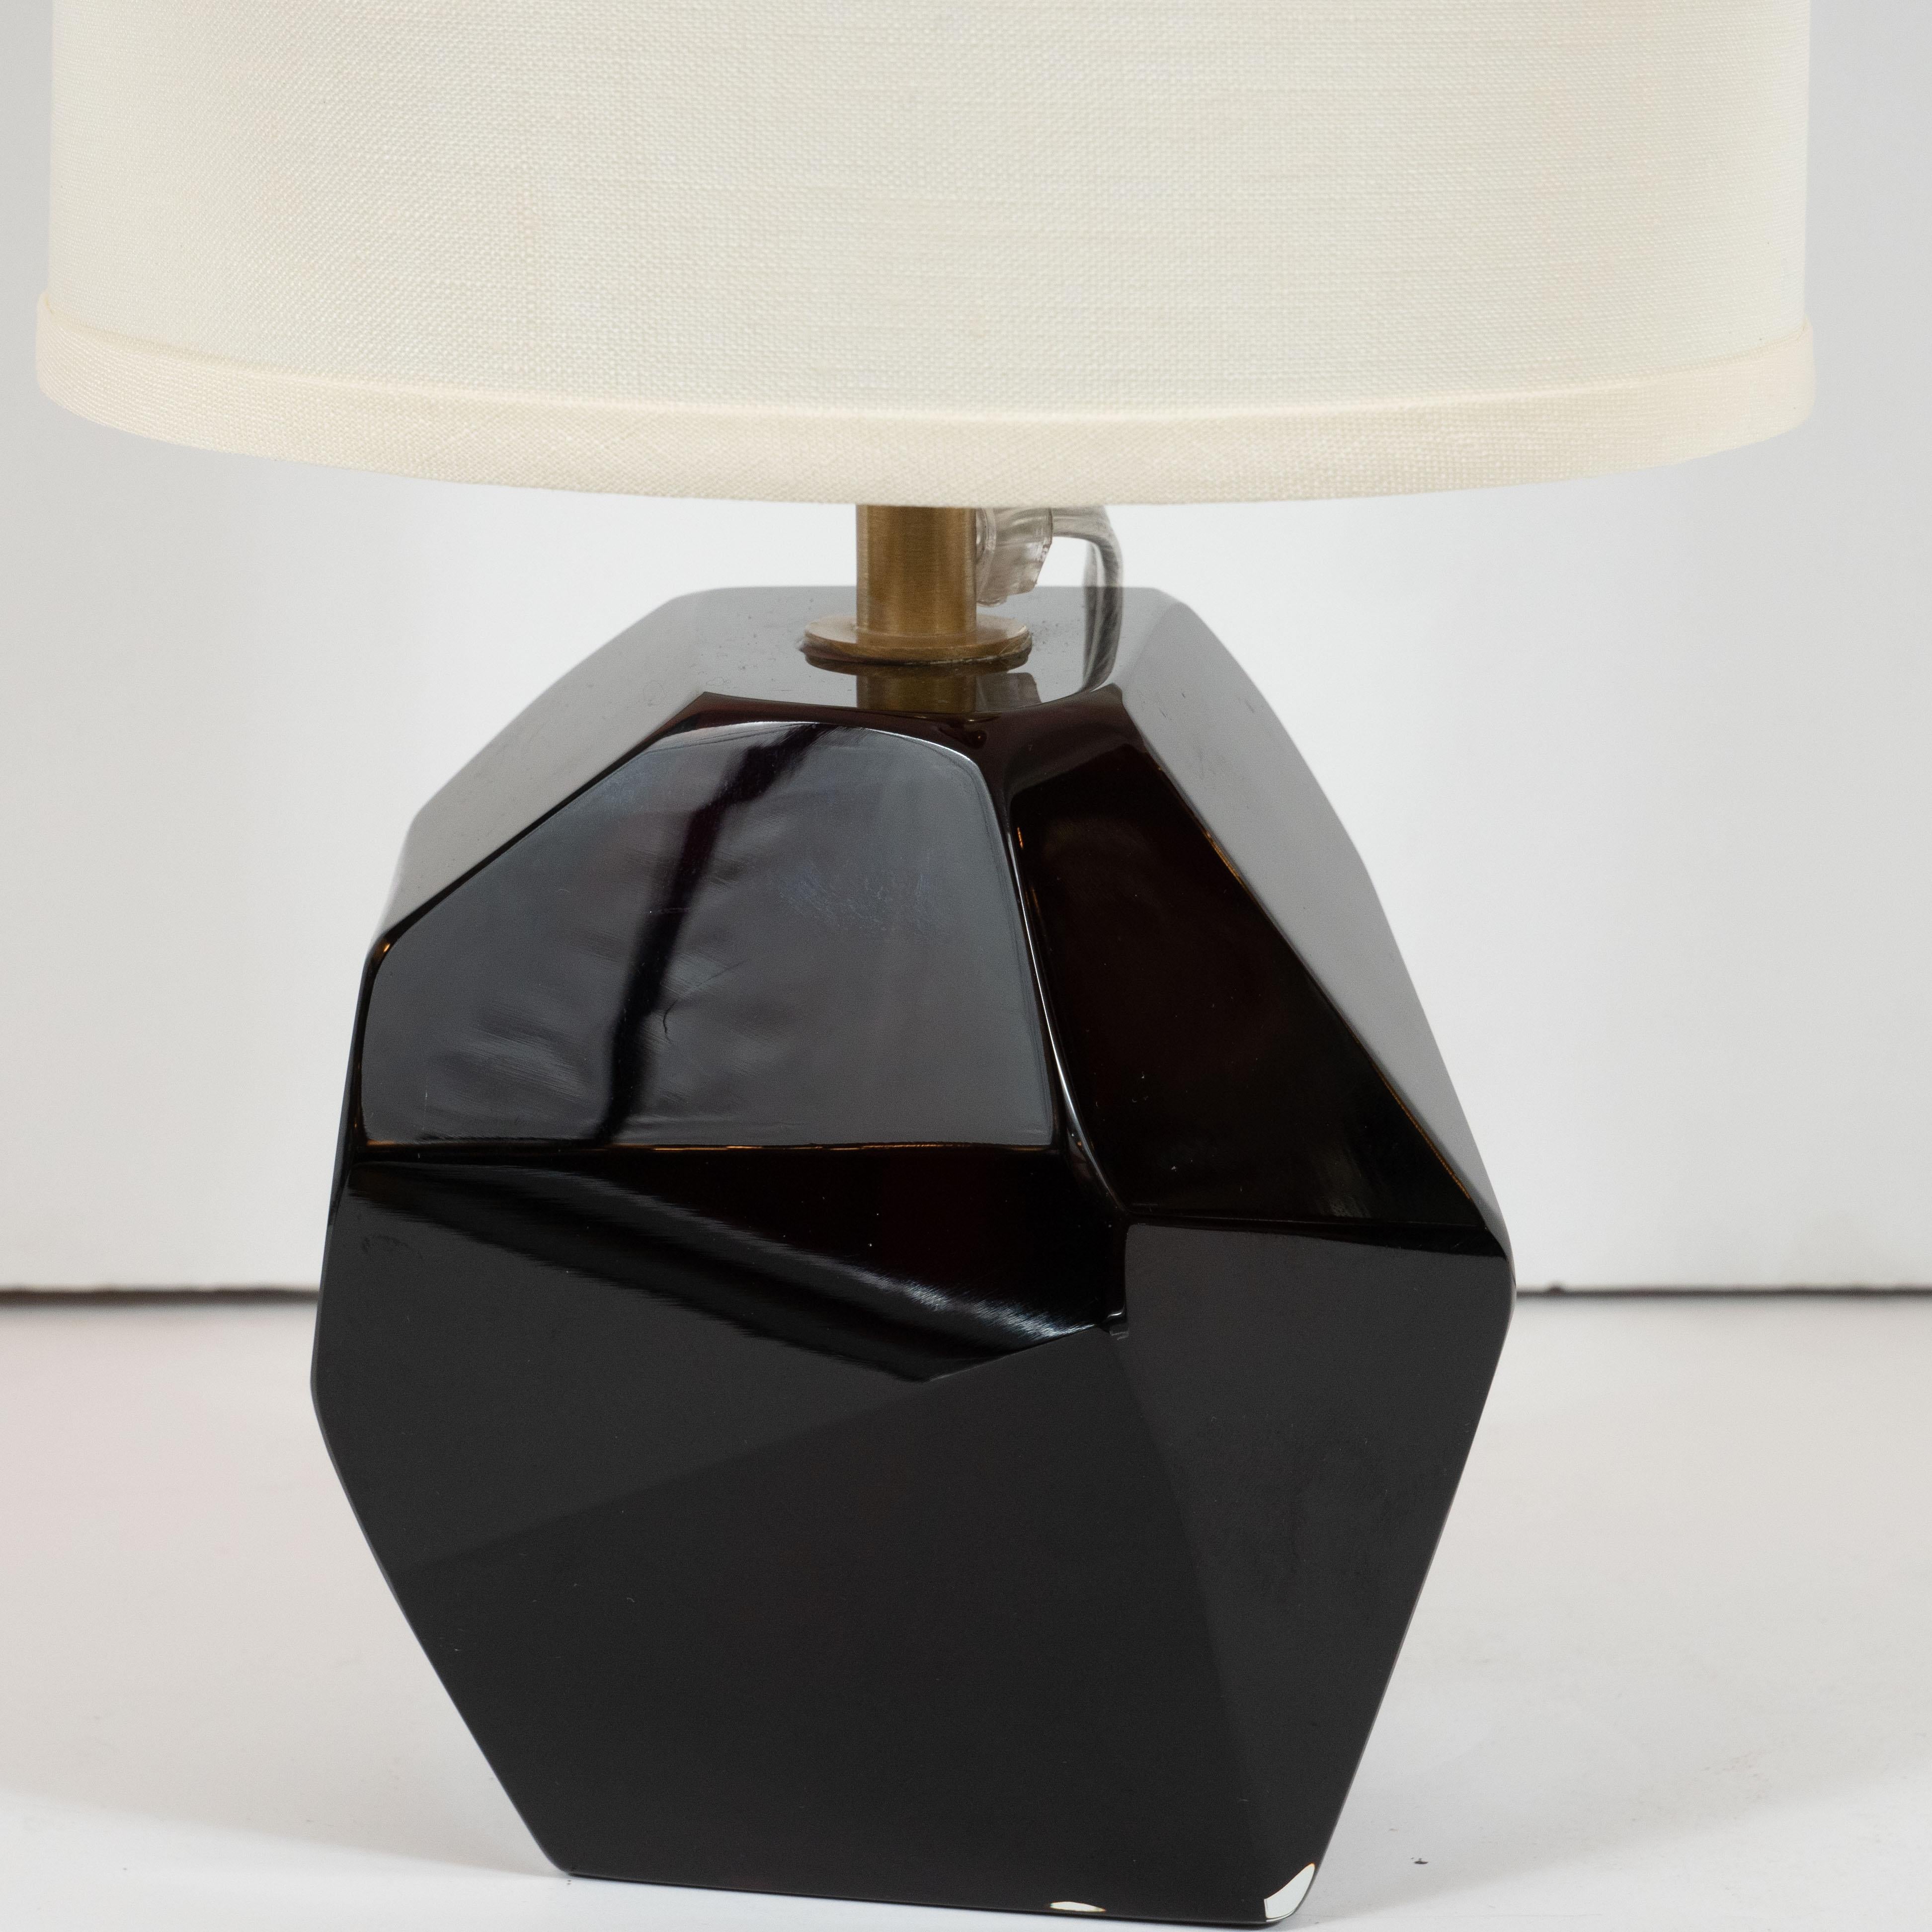 This stunning and elegant pair of table lamps were realized in Murano, Italy- the island off the coast of Venice renowned for centuries for its superlative glass production. They feature faceted bodies- like oversized cut gemstones- in a gorgeous